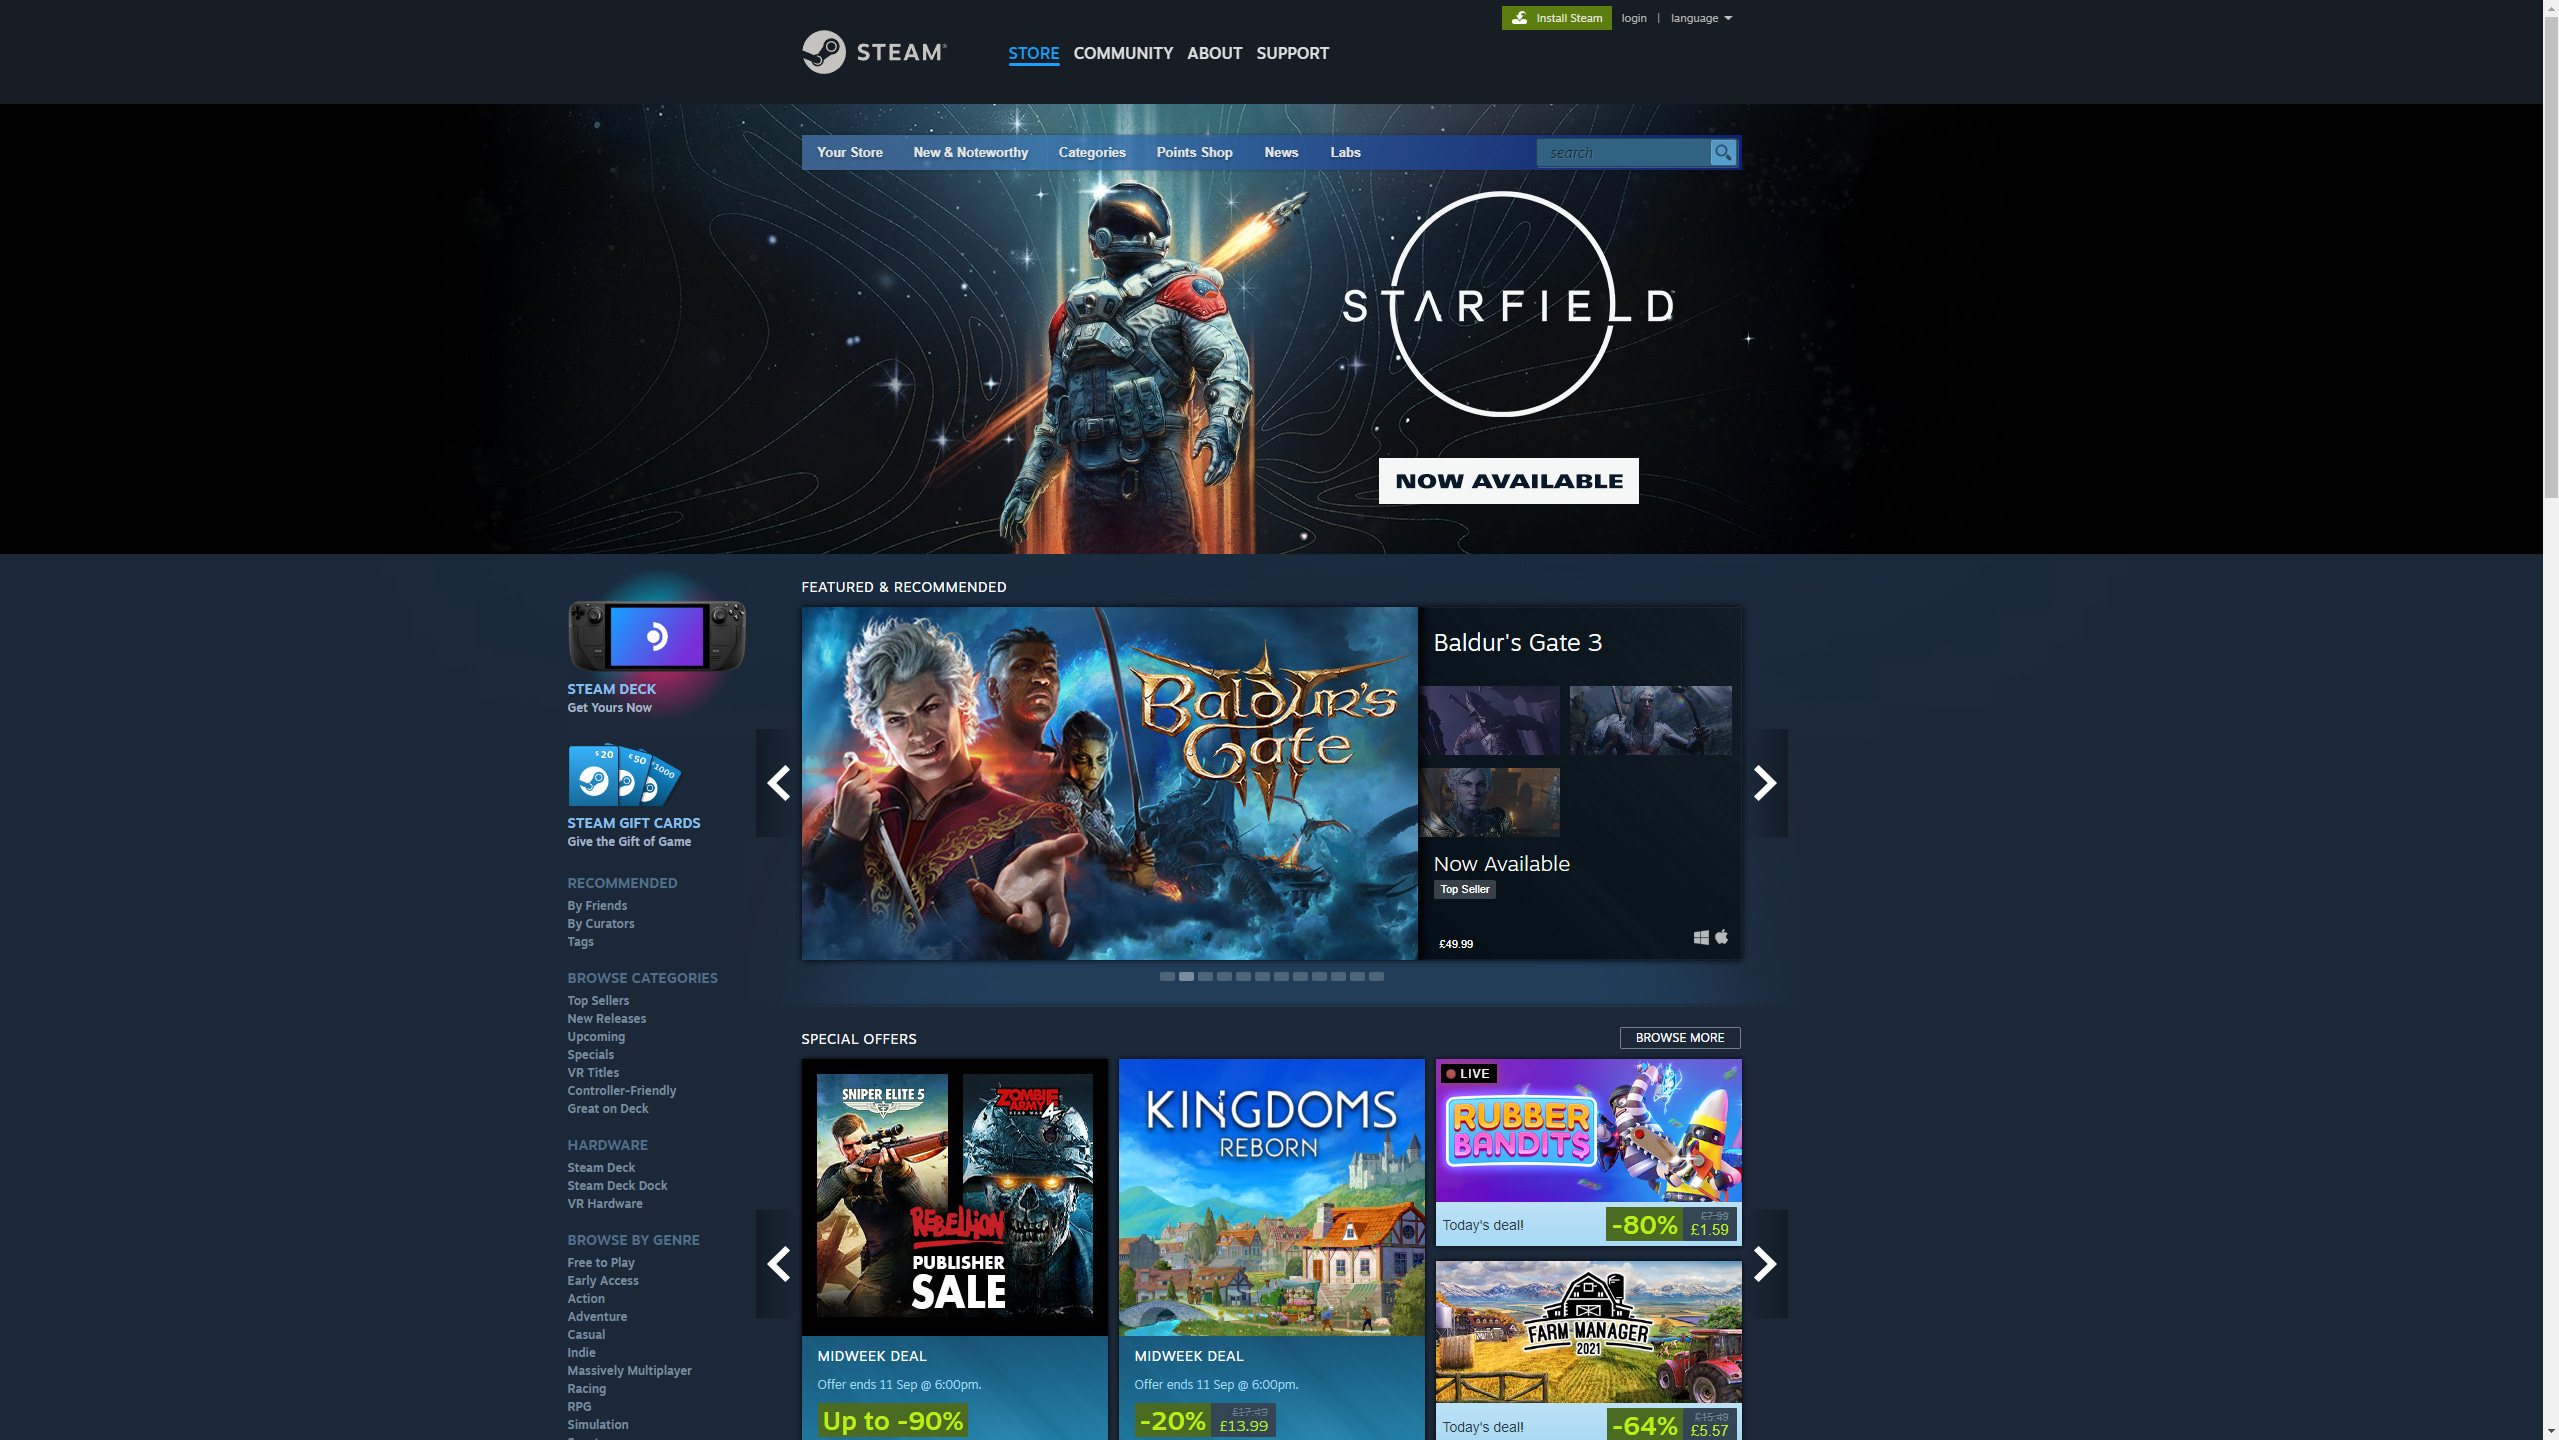 AI-generated content on Steam blocked by copyright law, Valve says